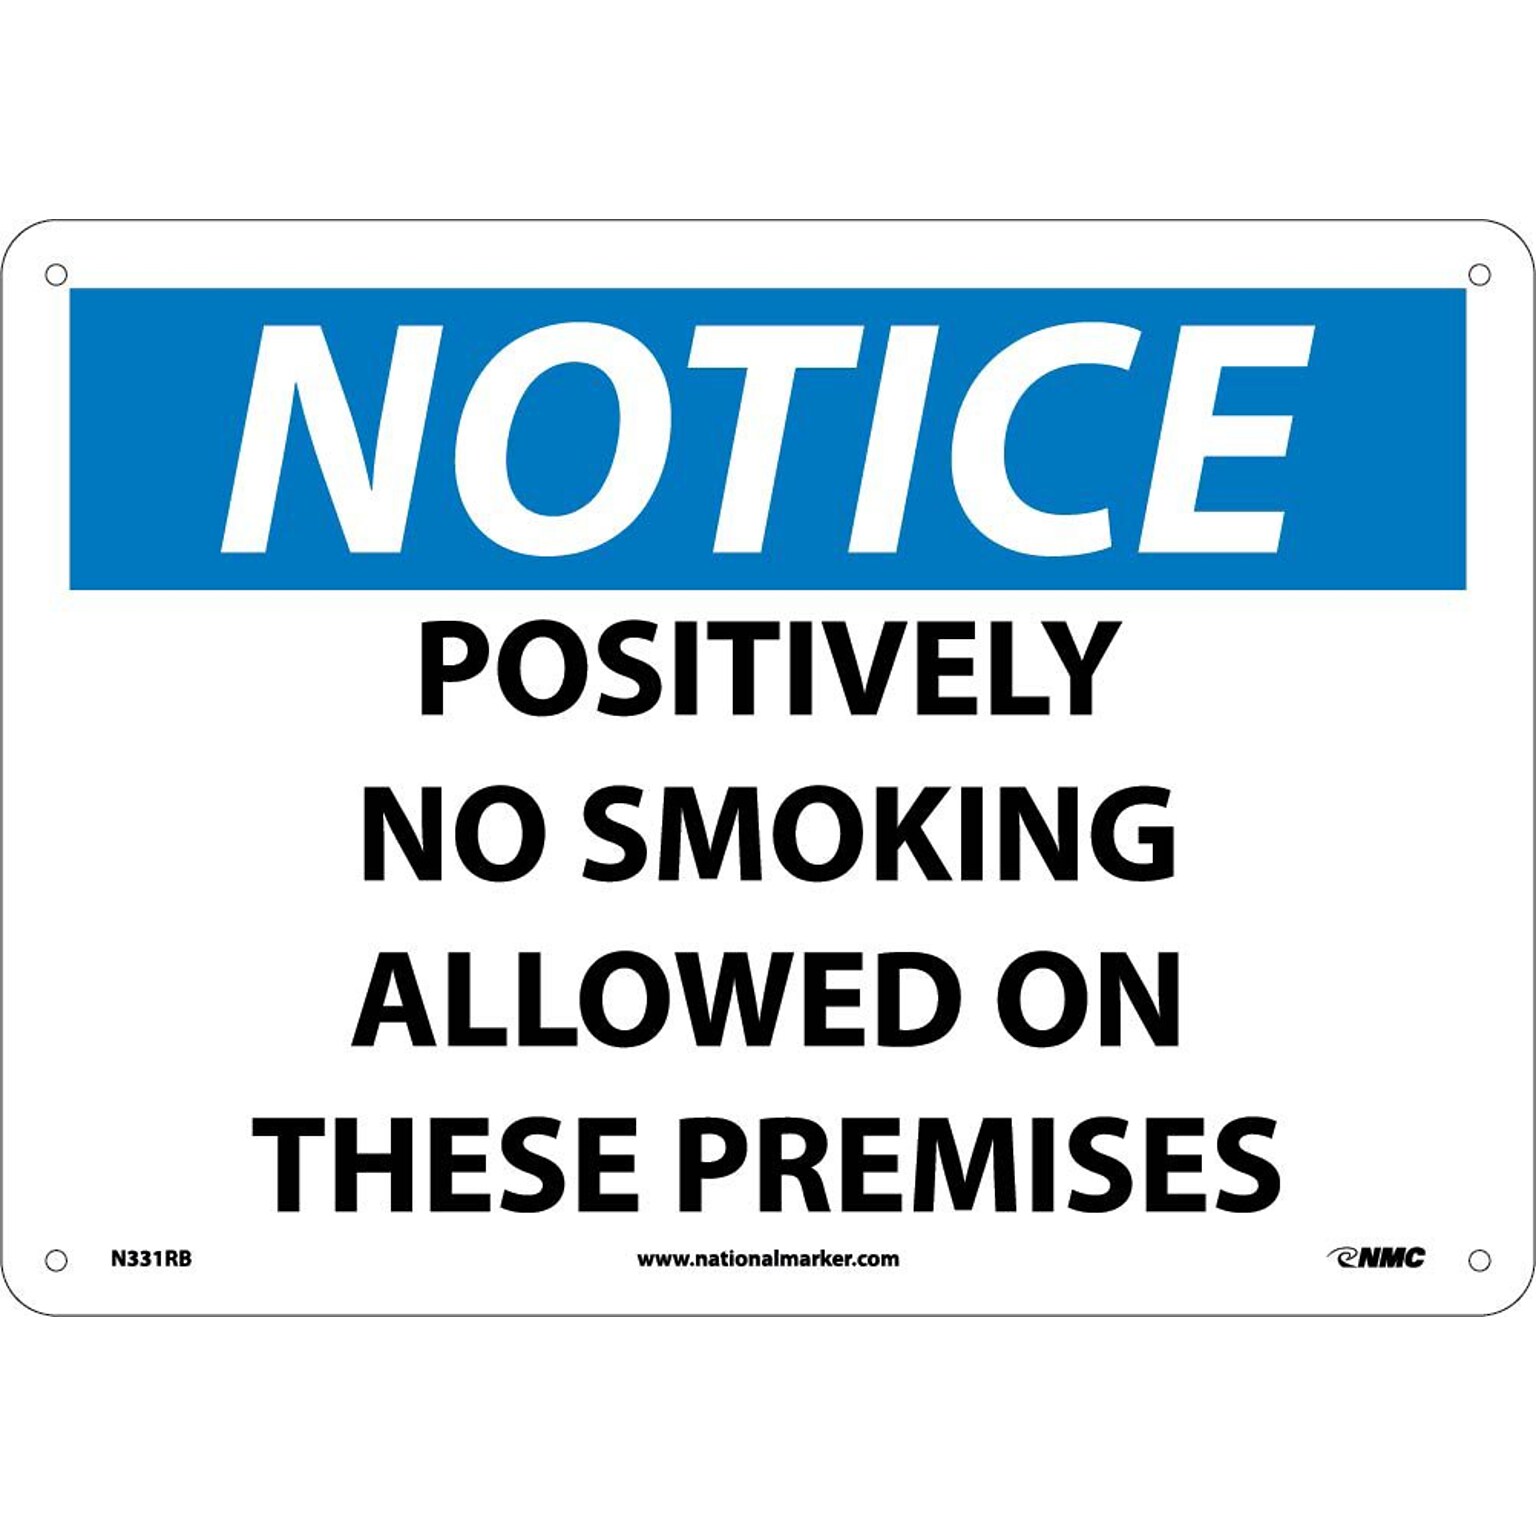 Positively No Smoking Allowed On These Premises, 10X14, Rigid Plastic, Notice Sign